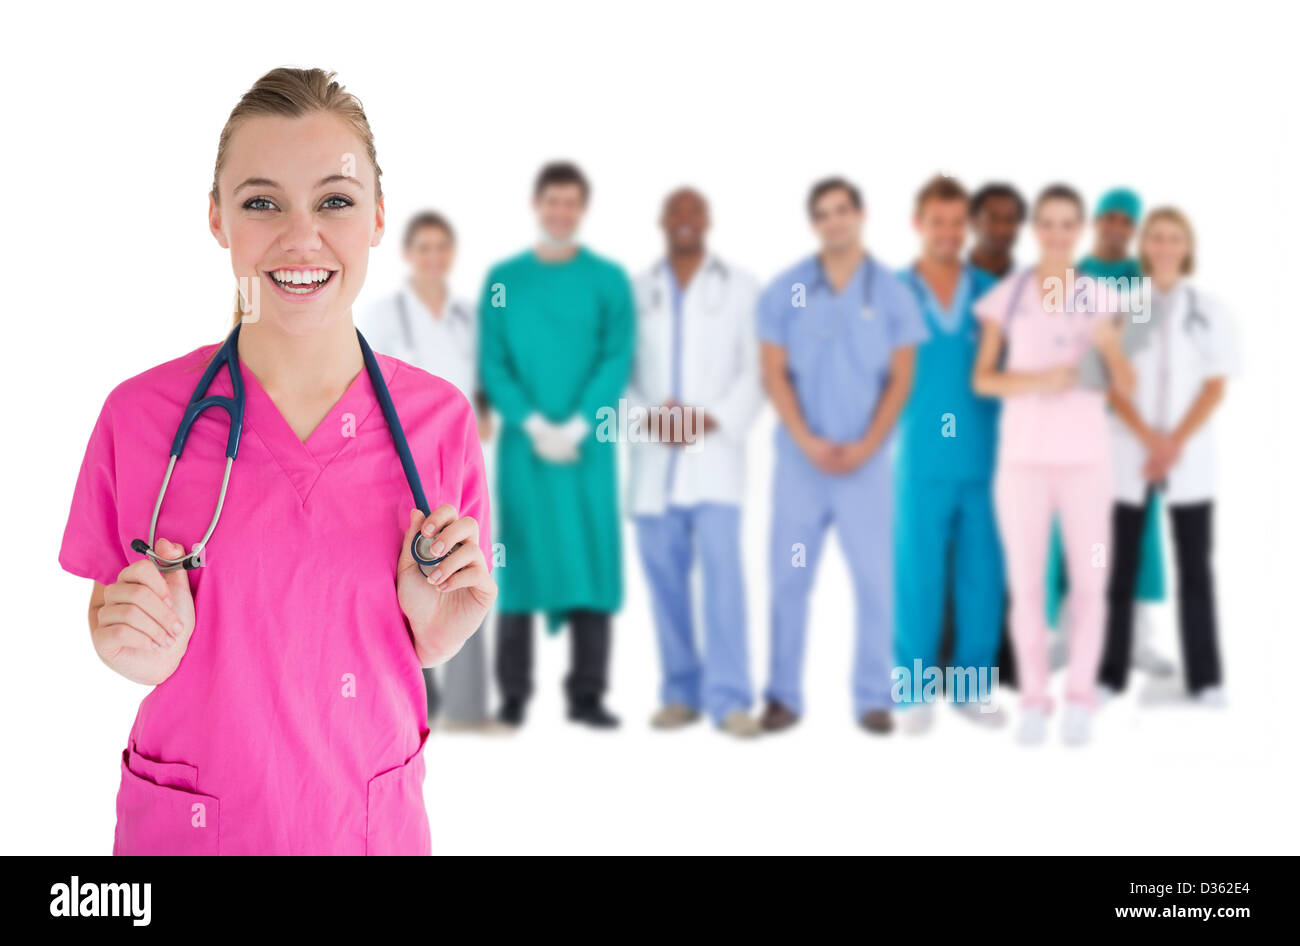 Smiling nurse with medical staff behind her Stock Photo